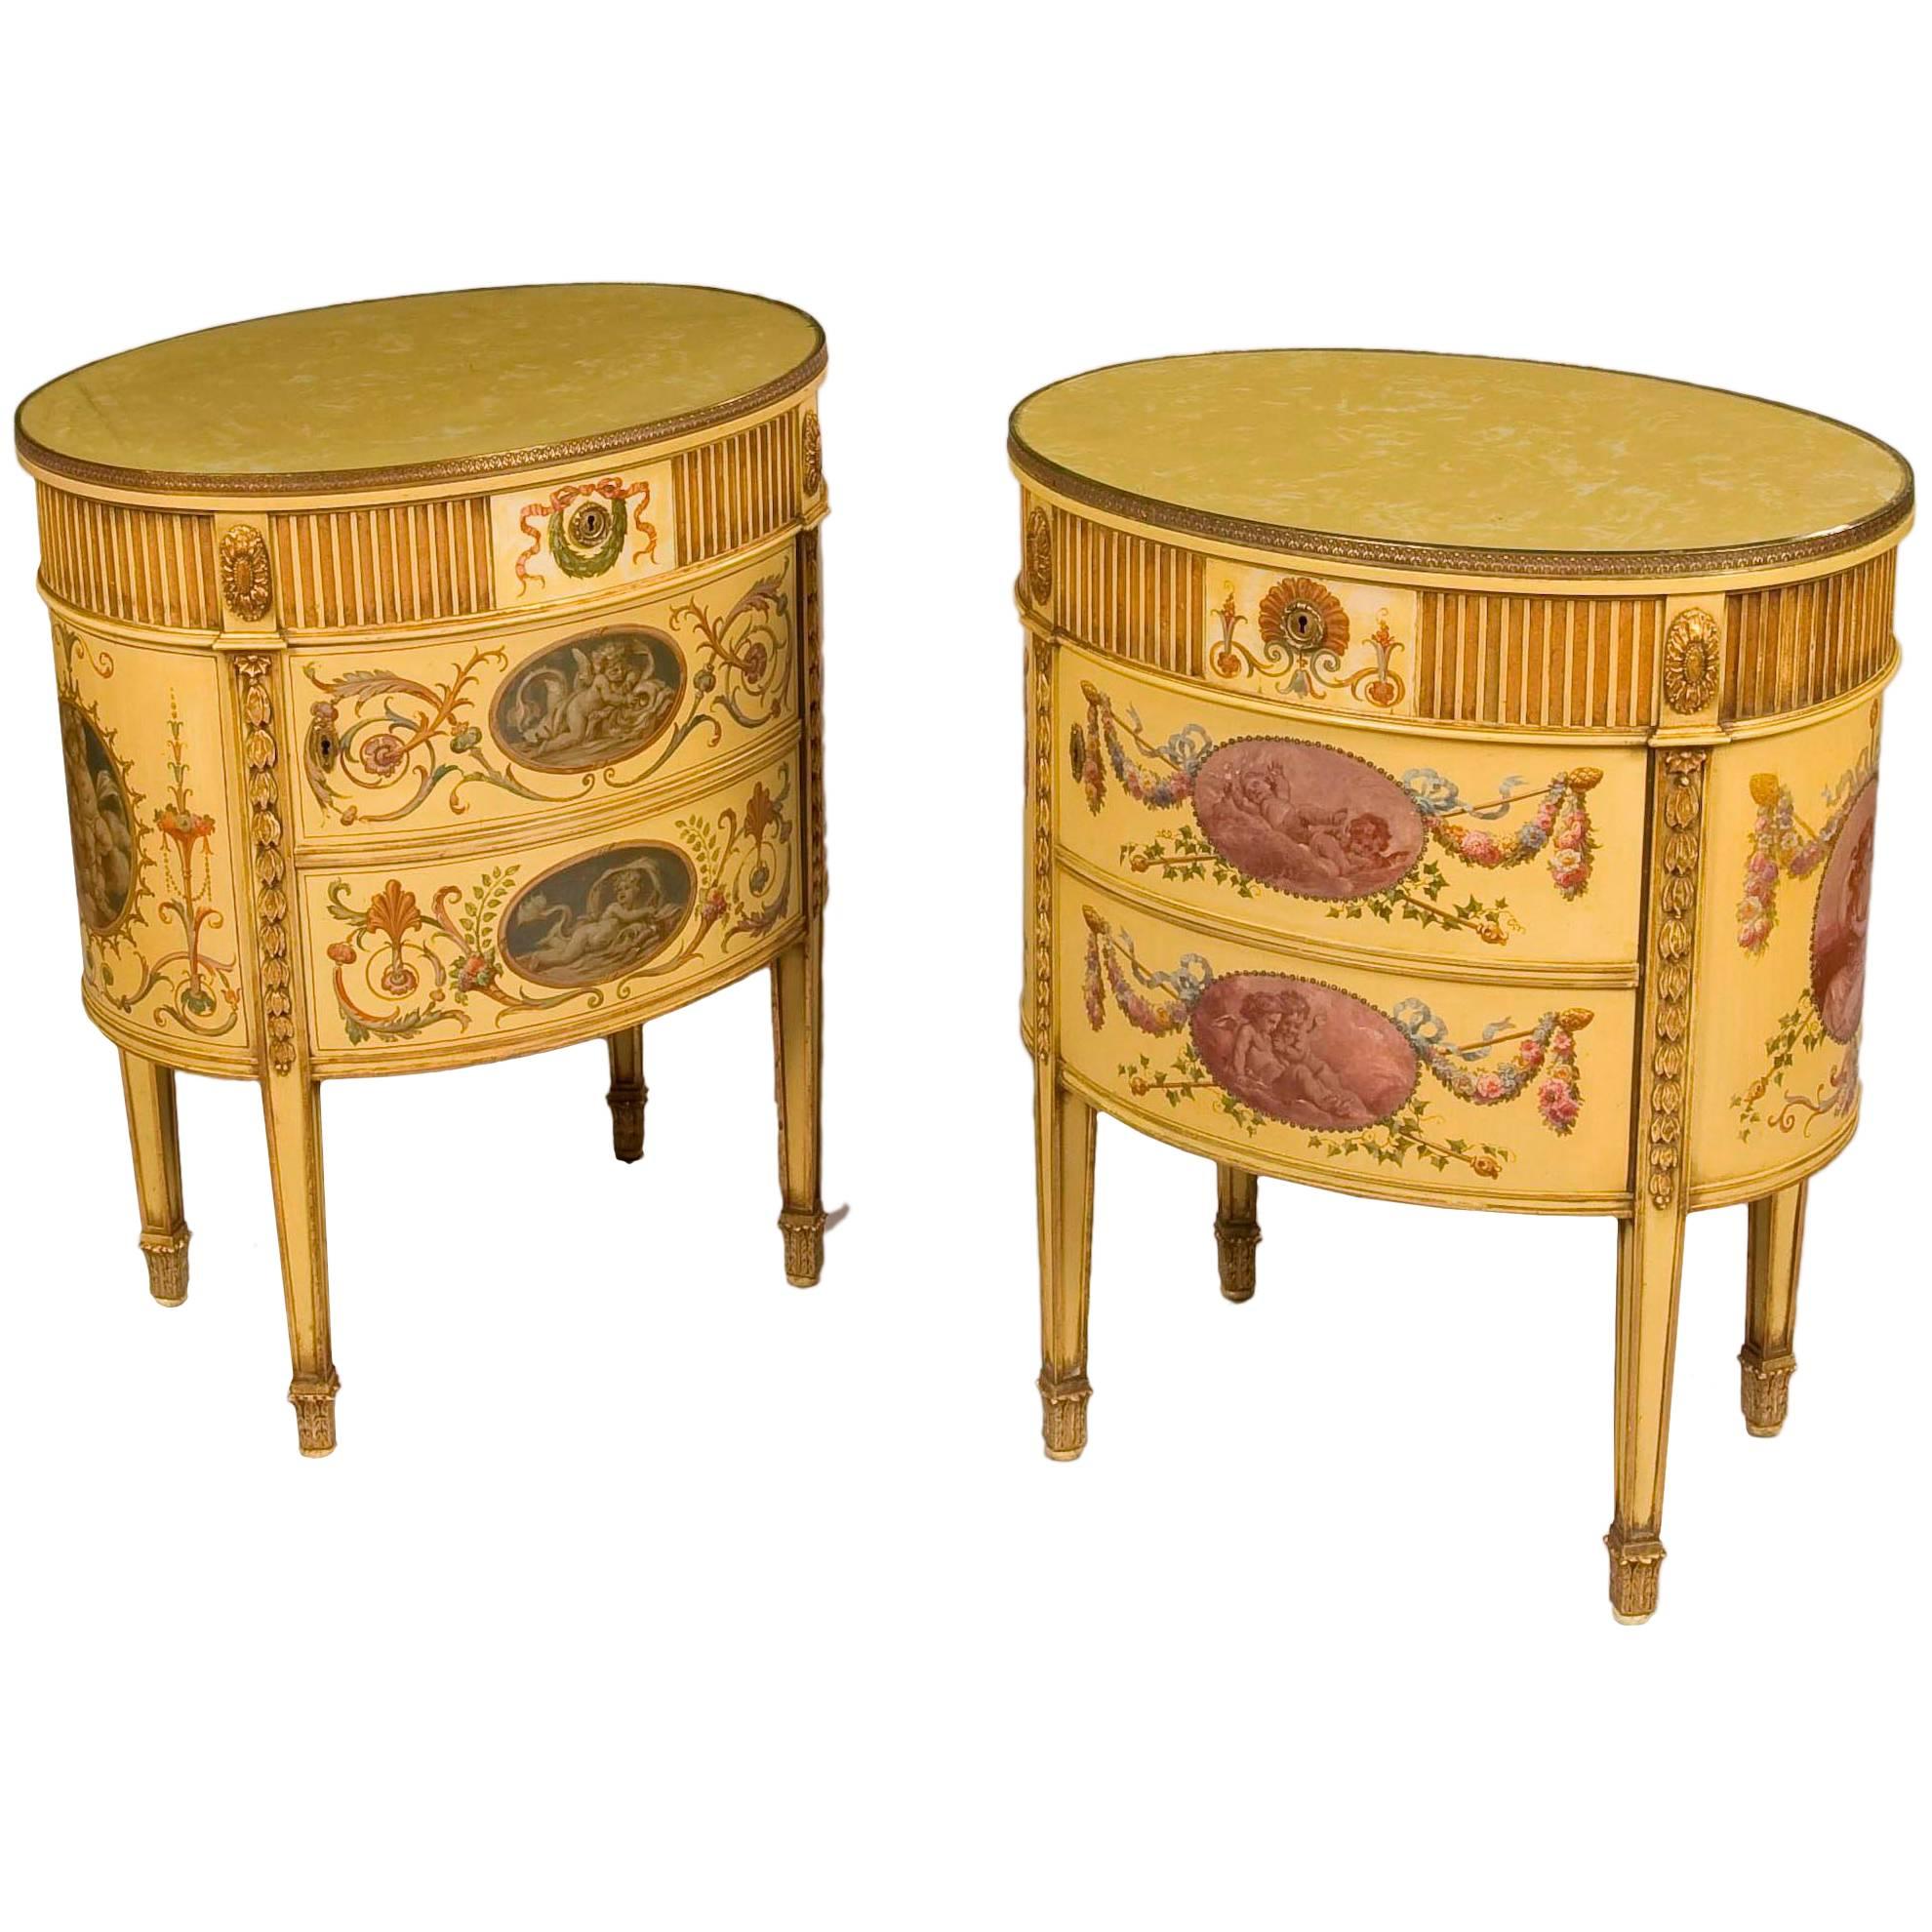 Pair of English Yellow Polychrome Cabinets in the Neoclassical Style